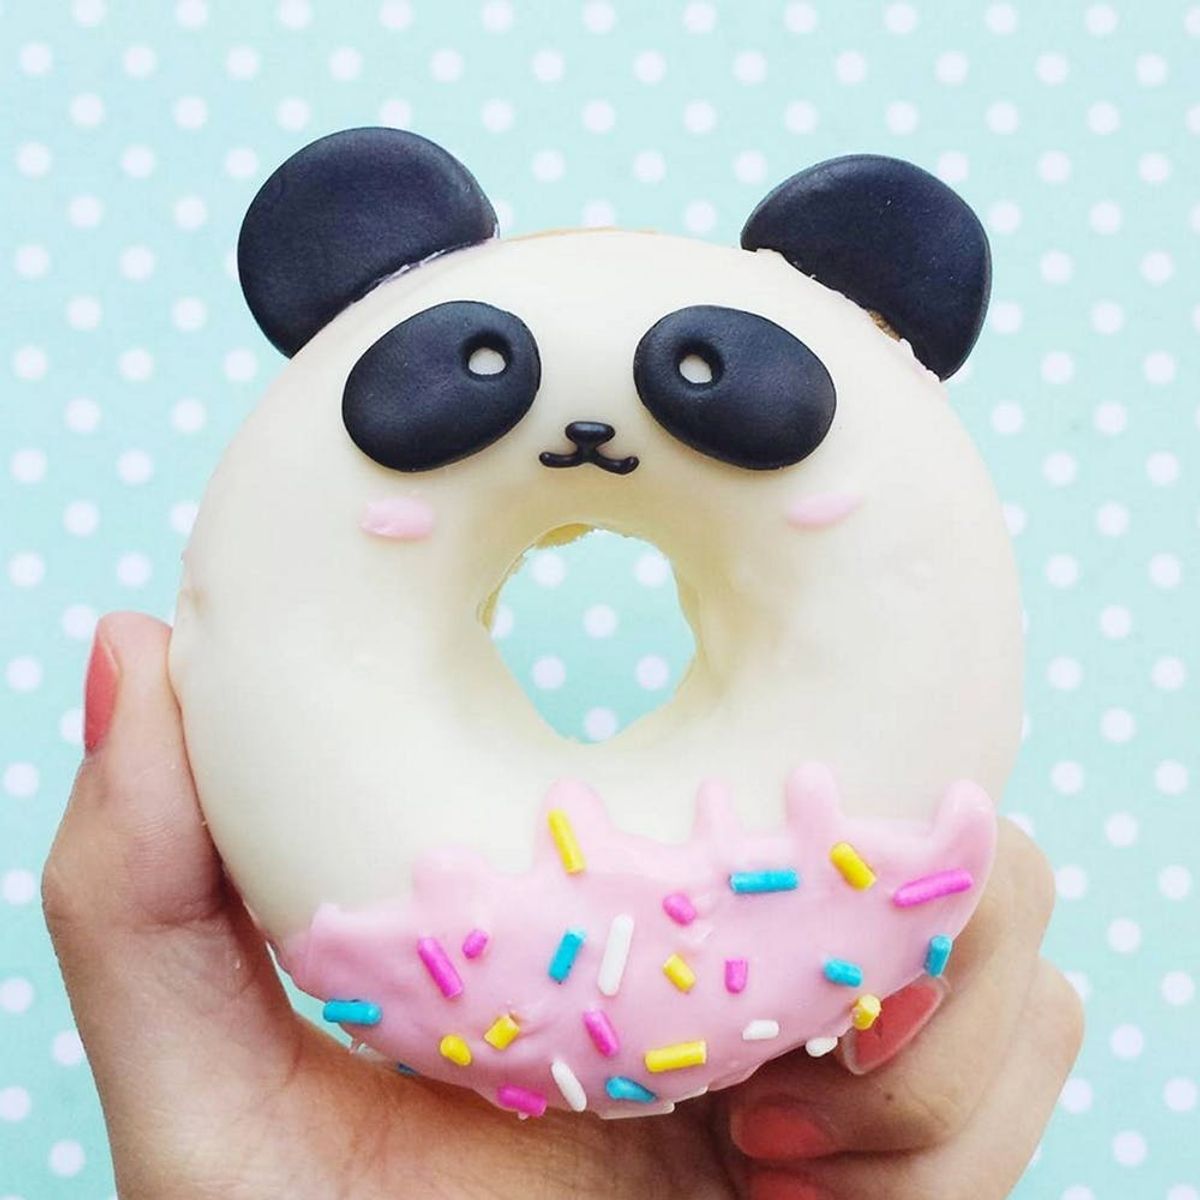 This Australian Baker’s Treats Are Almost Too Adorable to Eat